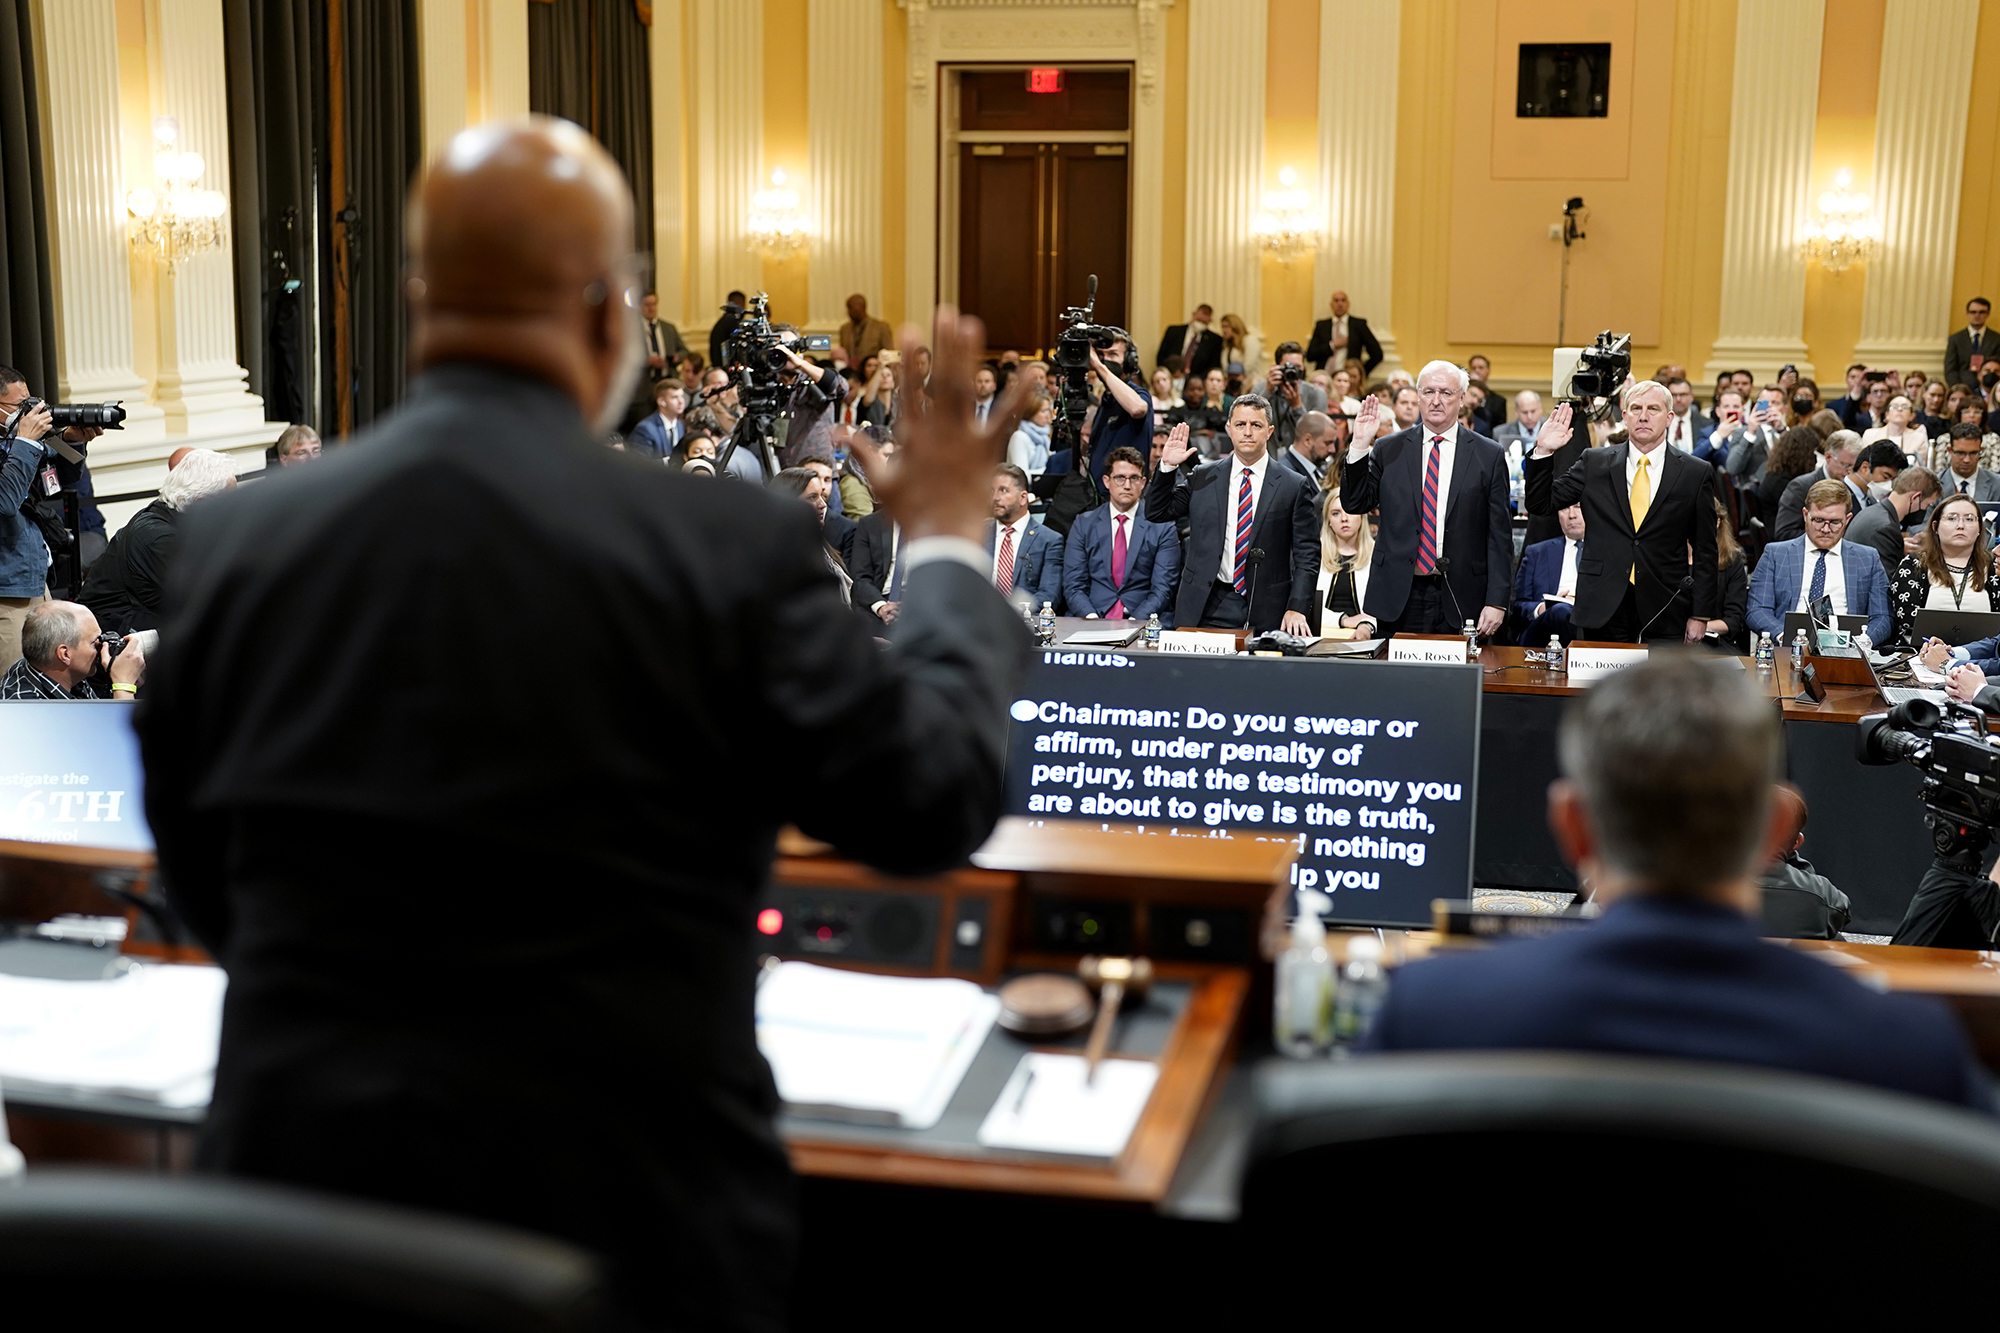 Representative Benny Thompson, Chairman of the House Select Committee to Investigate the January 6 Attack on the U.S. Capitol, left, swears in to Richard Donoghue, acting deputy attorney general, right, Jeffrey Rosen, acting attorney general, and Stephen Engel, assistant The former US attorney general for the Office of Legal Counsel, during a hearing in Washington, D.C., on Thursday.